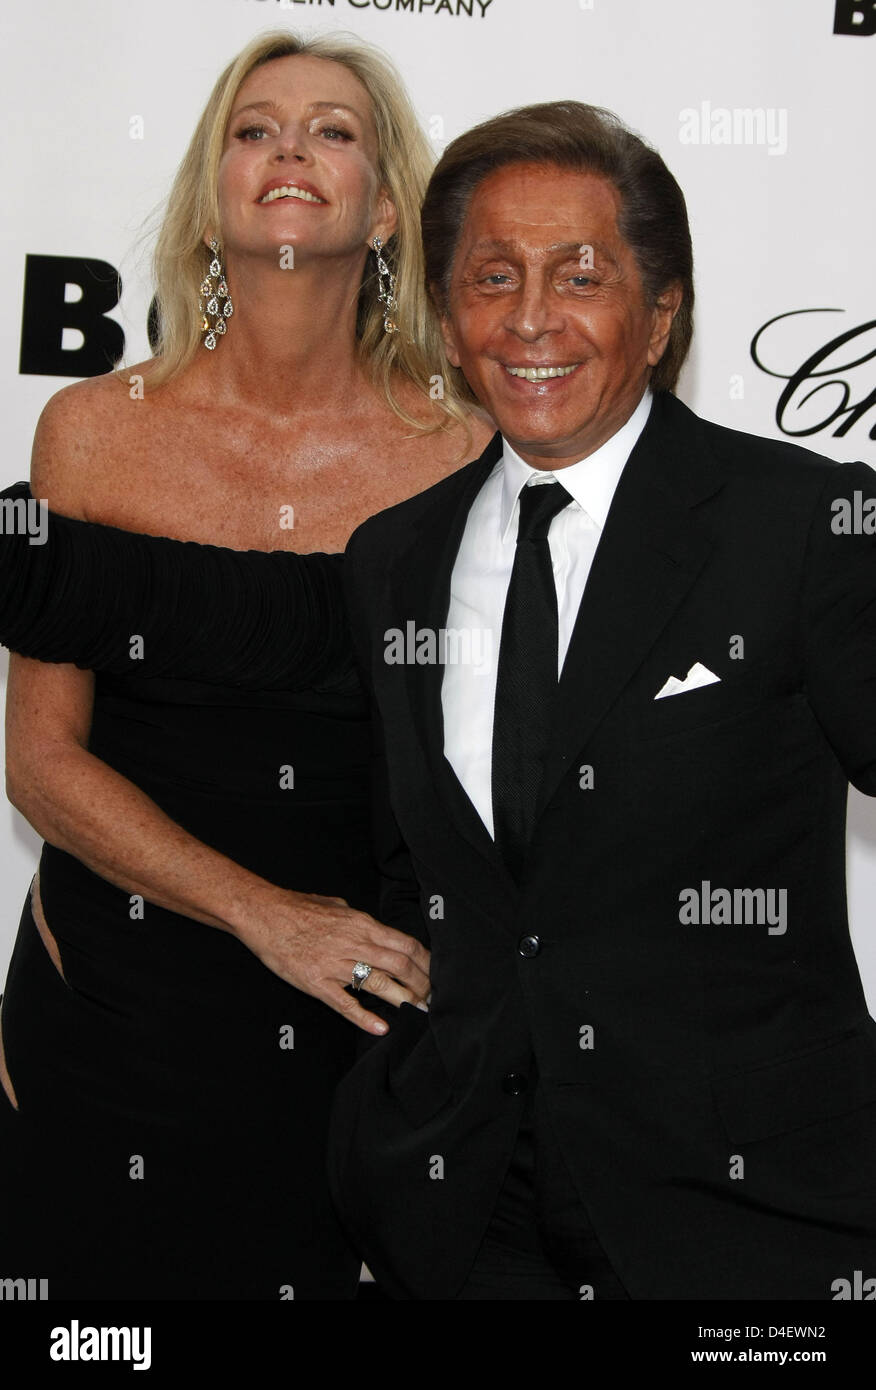 Fashion designer Valentino arrives with a guest at the amfAR Cinema Against Aids Gala at the 61st Cannes Film Festival in Cannes, France, 22 May 2008. Photo: Hubert Boesl Stock Photo